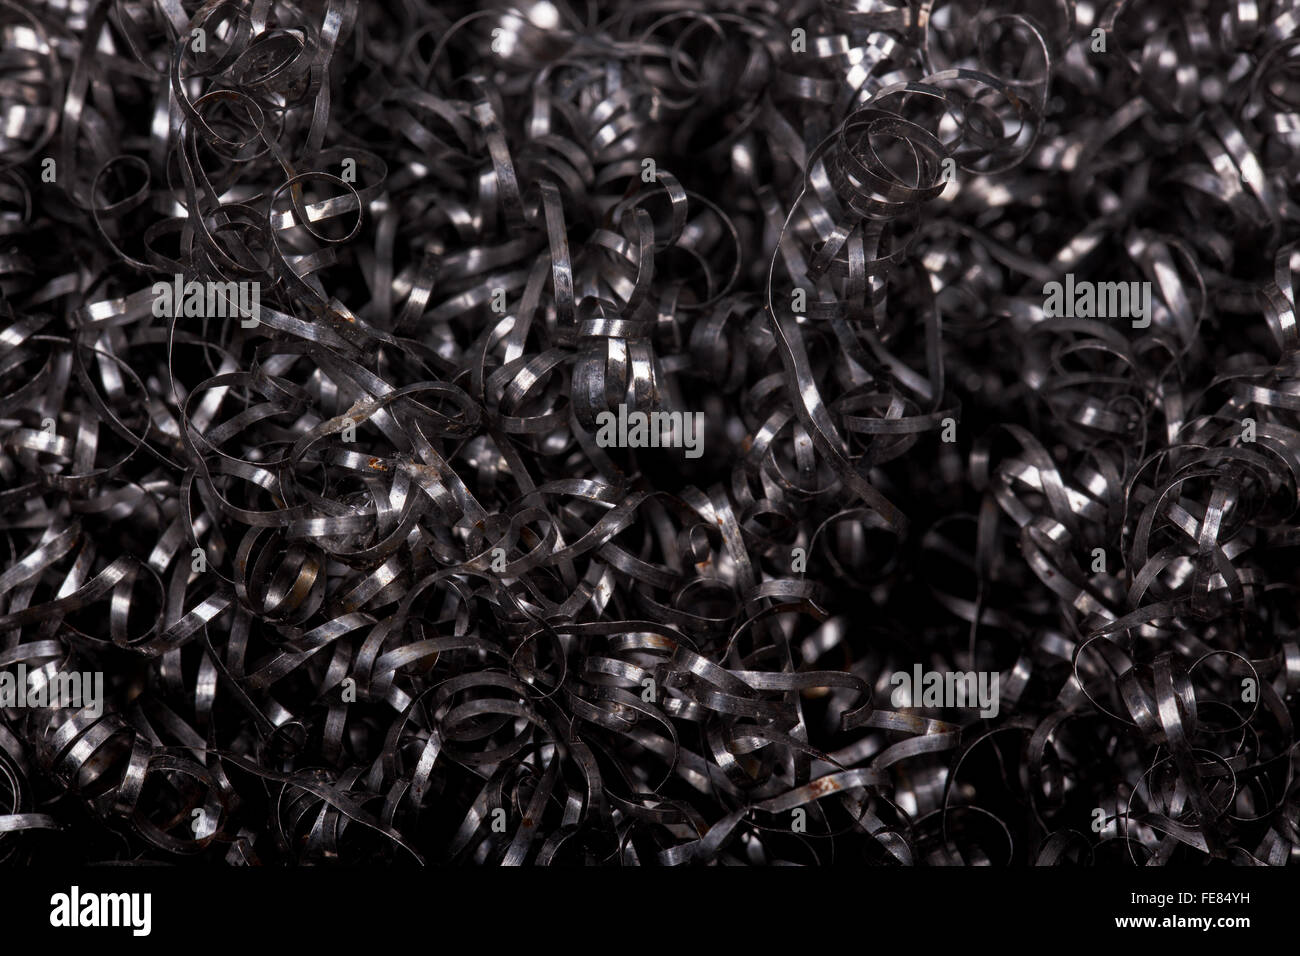 steel wool closeup suitable for texture or background Stock Photo